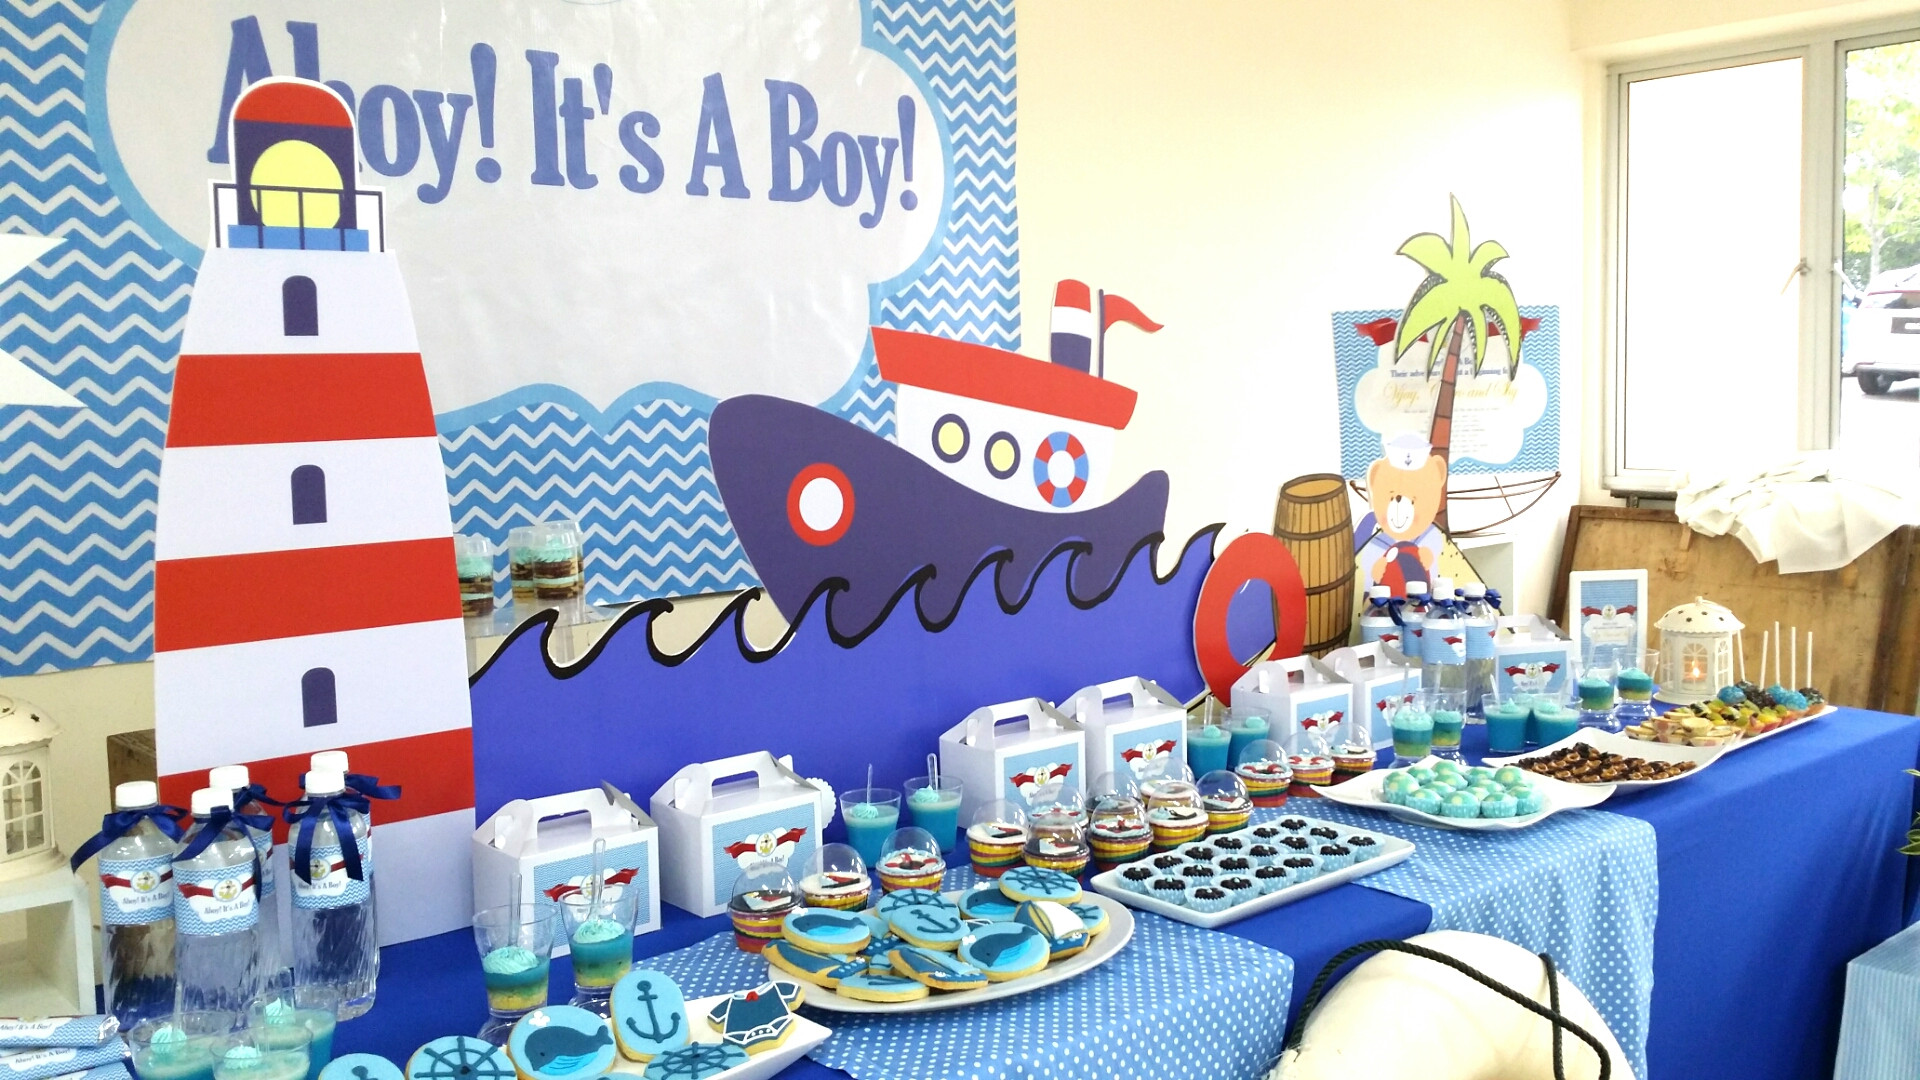 Nautical Decor For Baby Showers
 Theme Nautical Baby Shower – Its More Than Just A Party